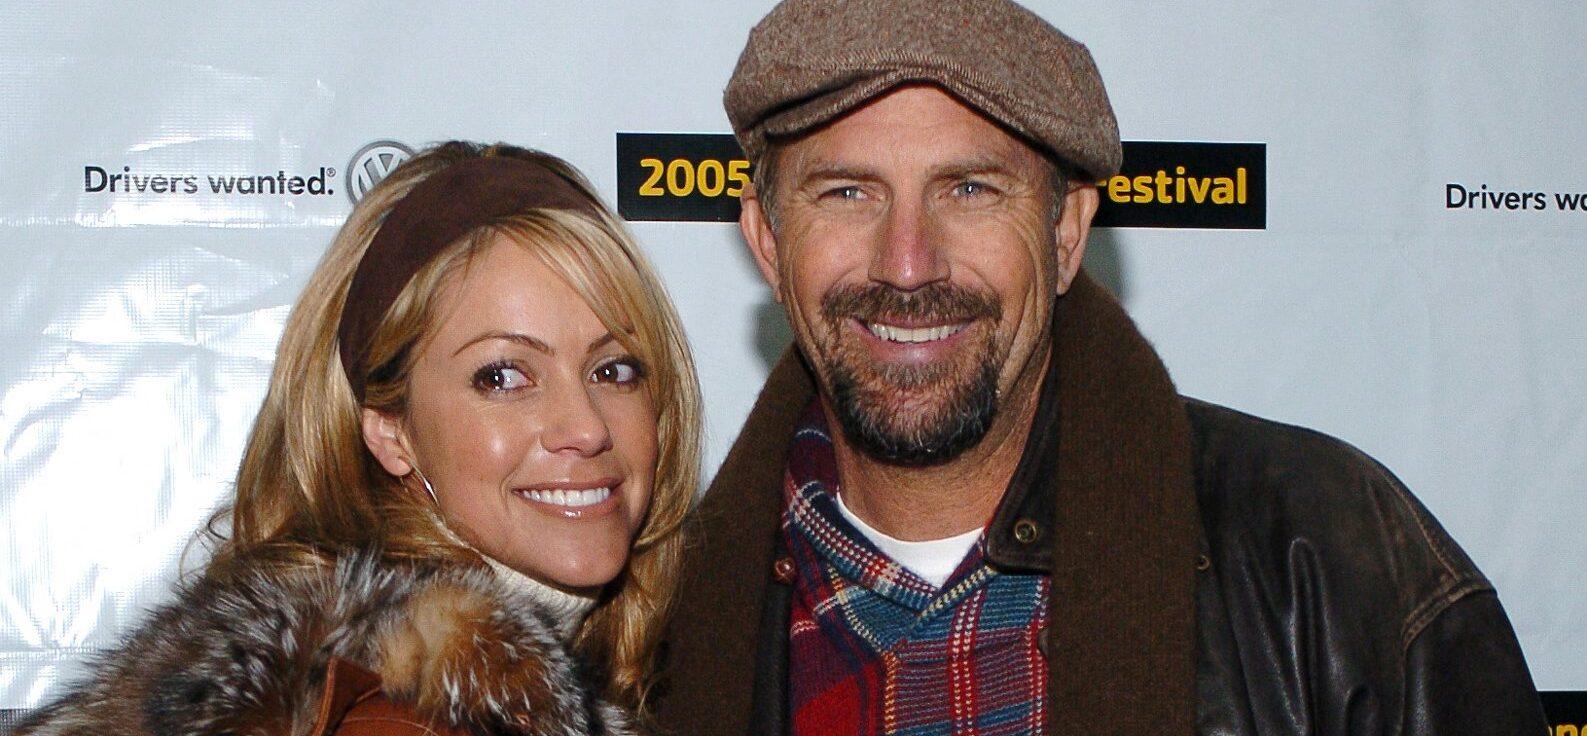 Kevin Costner's Ex-Wife Says His Behavior In Divorce Shows 'Lack Of Maturity'